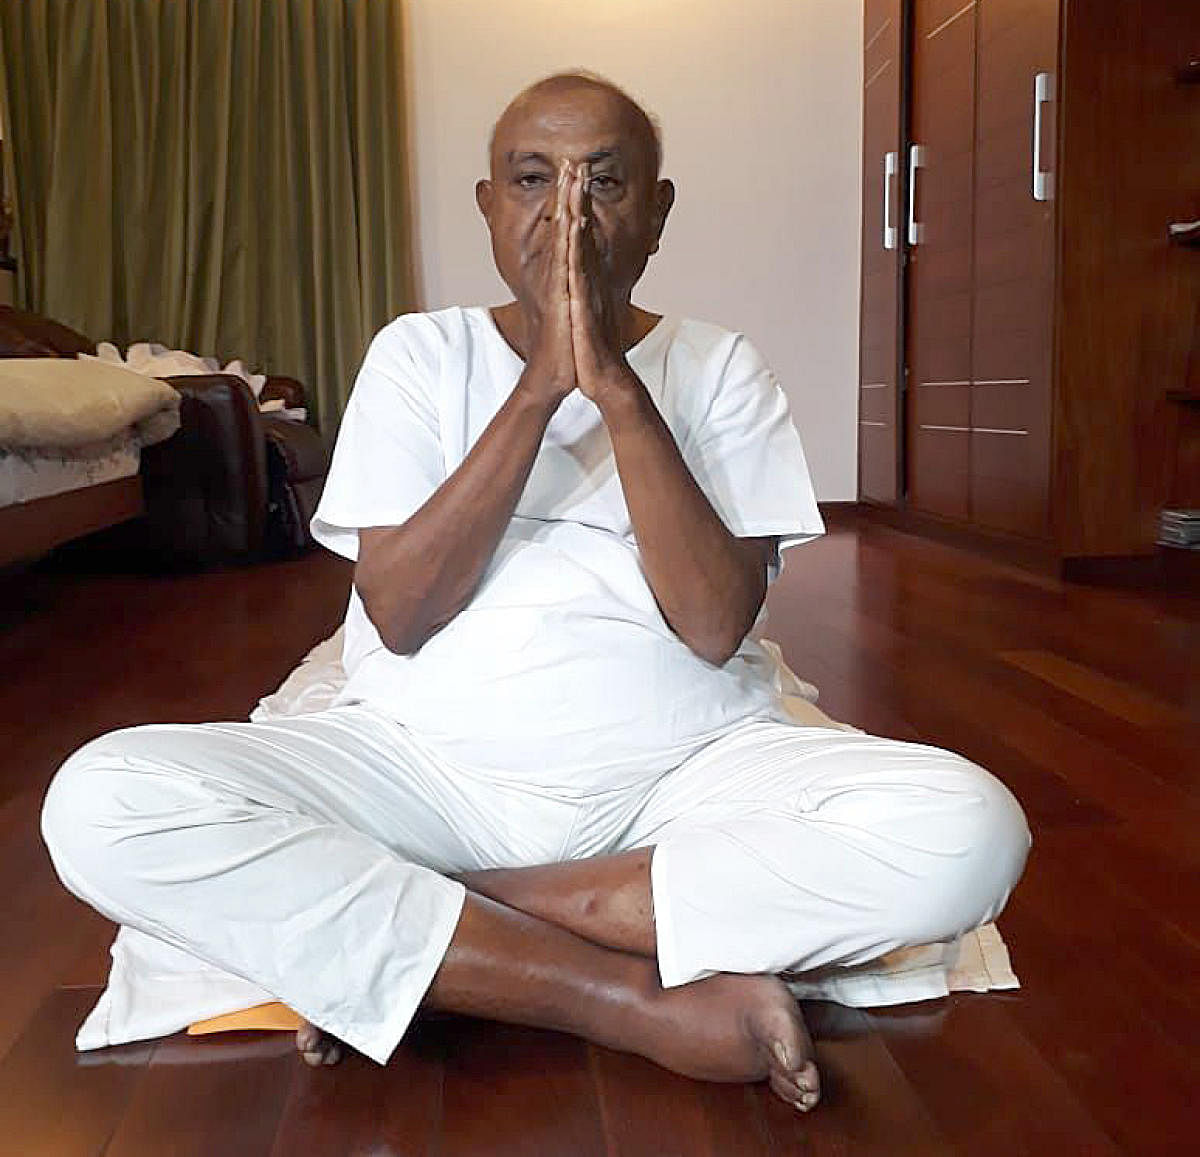 JD(S) supremo H D Deve Gowda performs yoga at his residence in Bengaluru on the occasion of International Yoga Day on Friday.